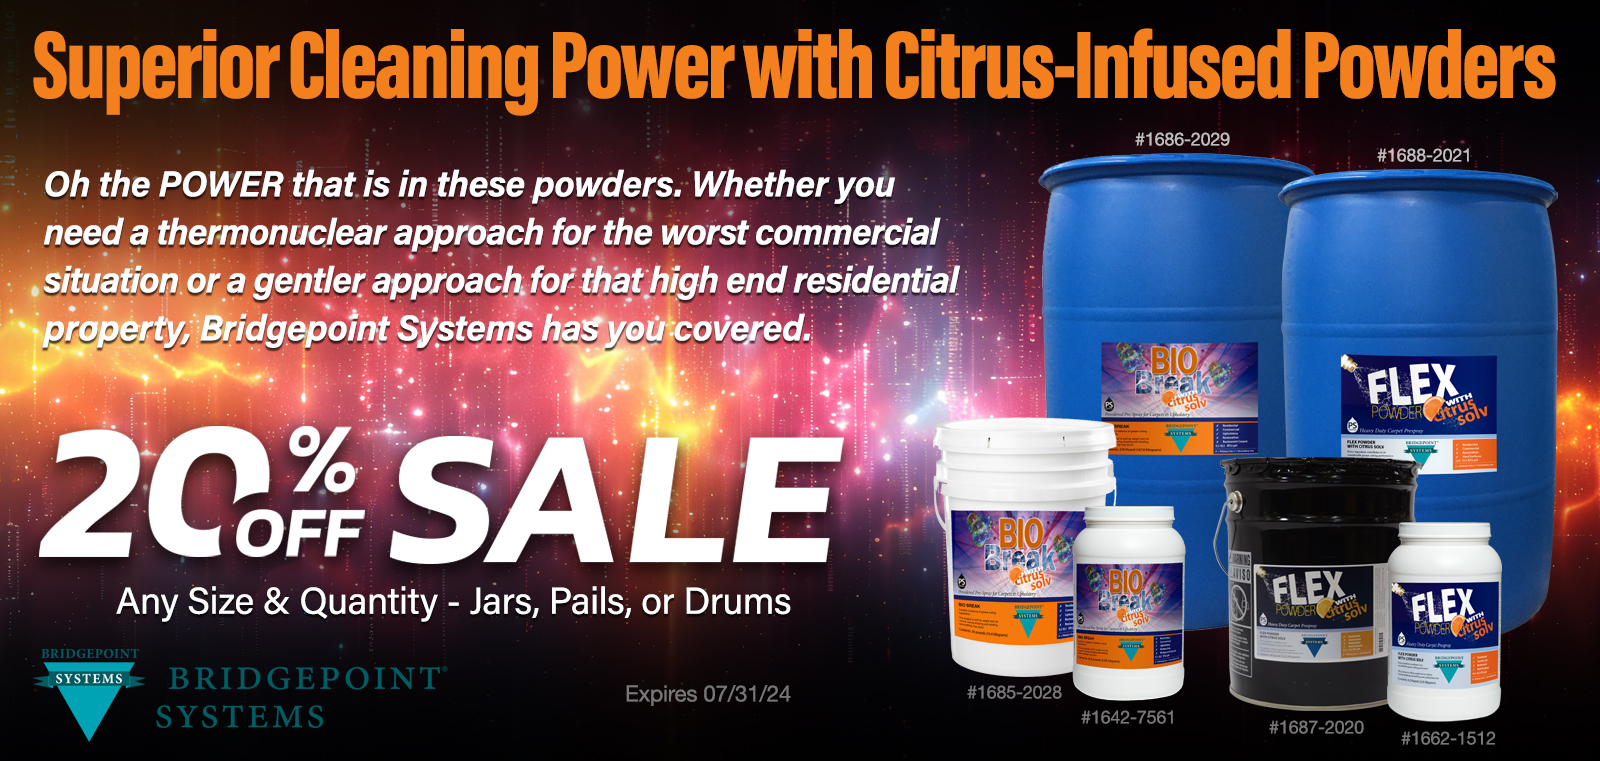 Superior Cleaning Power with Citrus-Infused Powders. 20% off sale, Any Size & Quantity - Jars, Pails or Drums